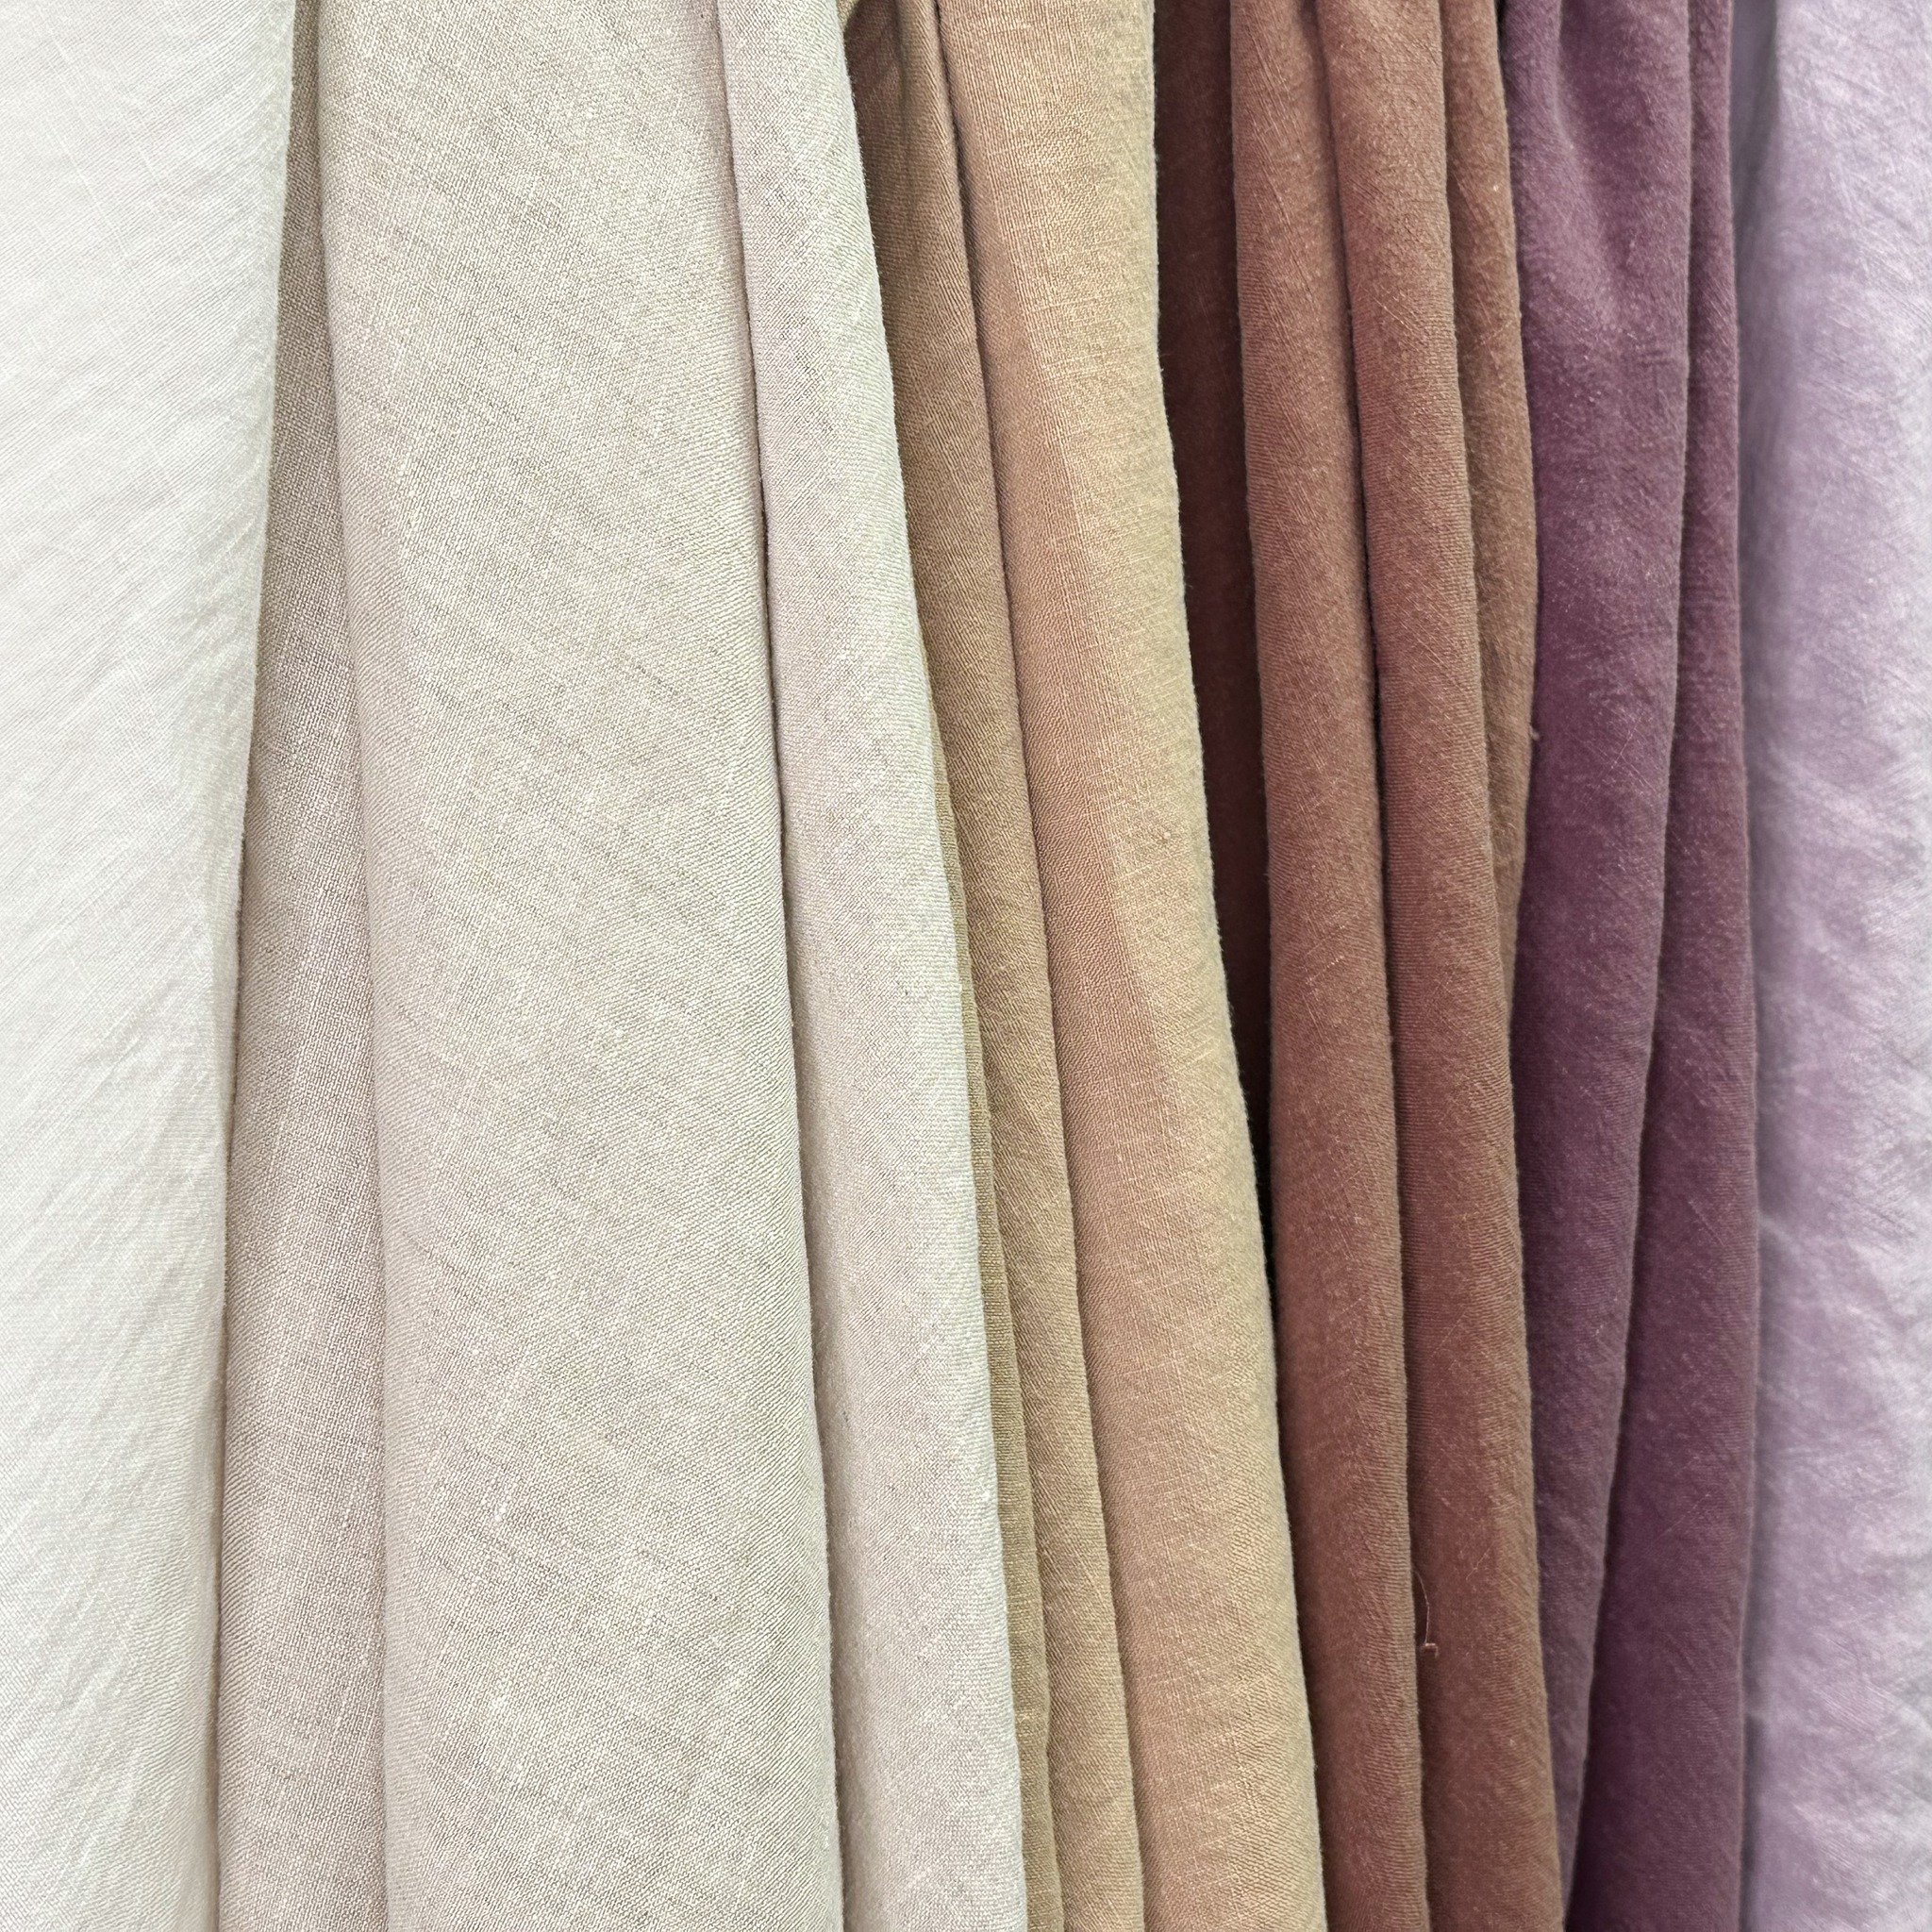 A detailed look at our best-selling linen, Cairo.

We have a new shipment of Cairo on the way to us, but in the mean time, we still have several colours in stock! View the full colour range on our website.

#gordonfabricsltd #GFL #SS25 #fabricwholesa